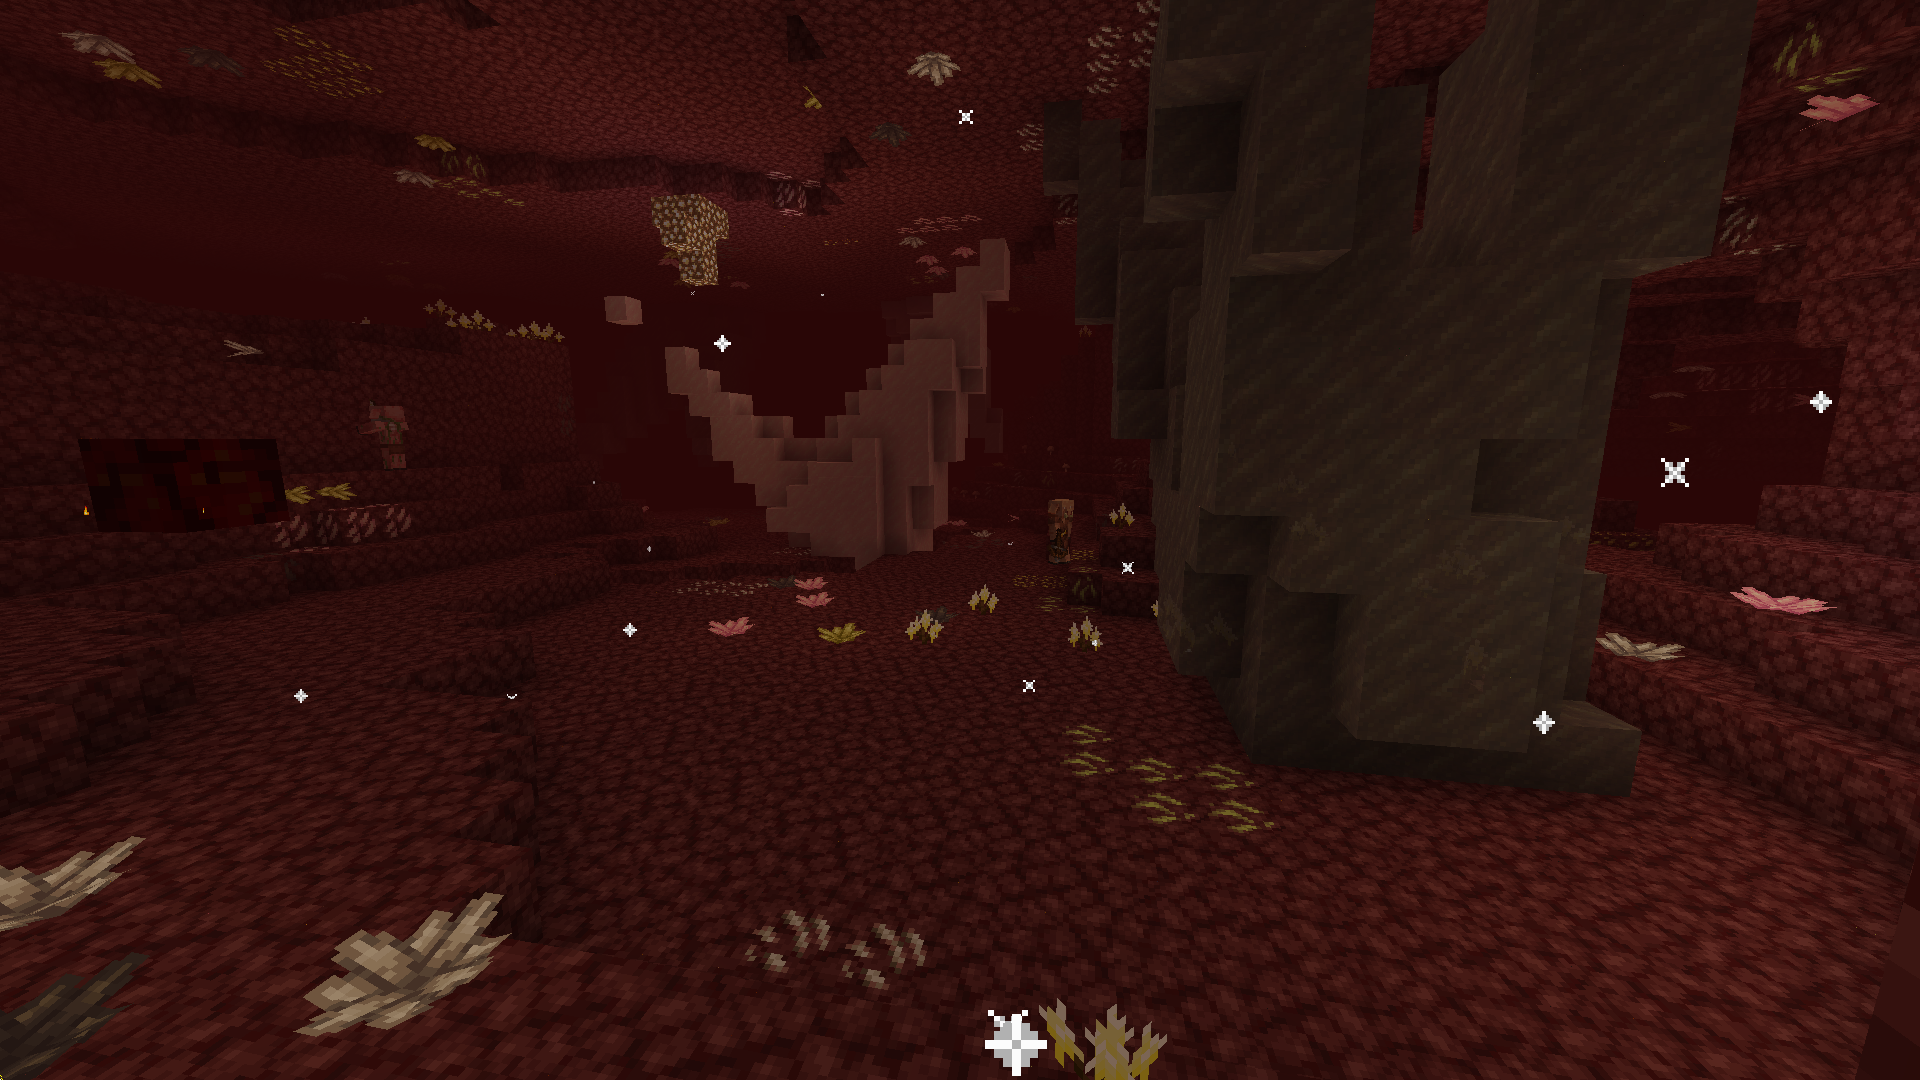 Nether crystals